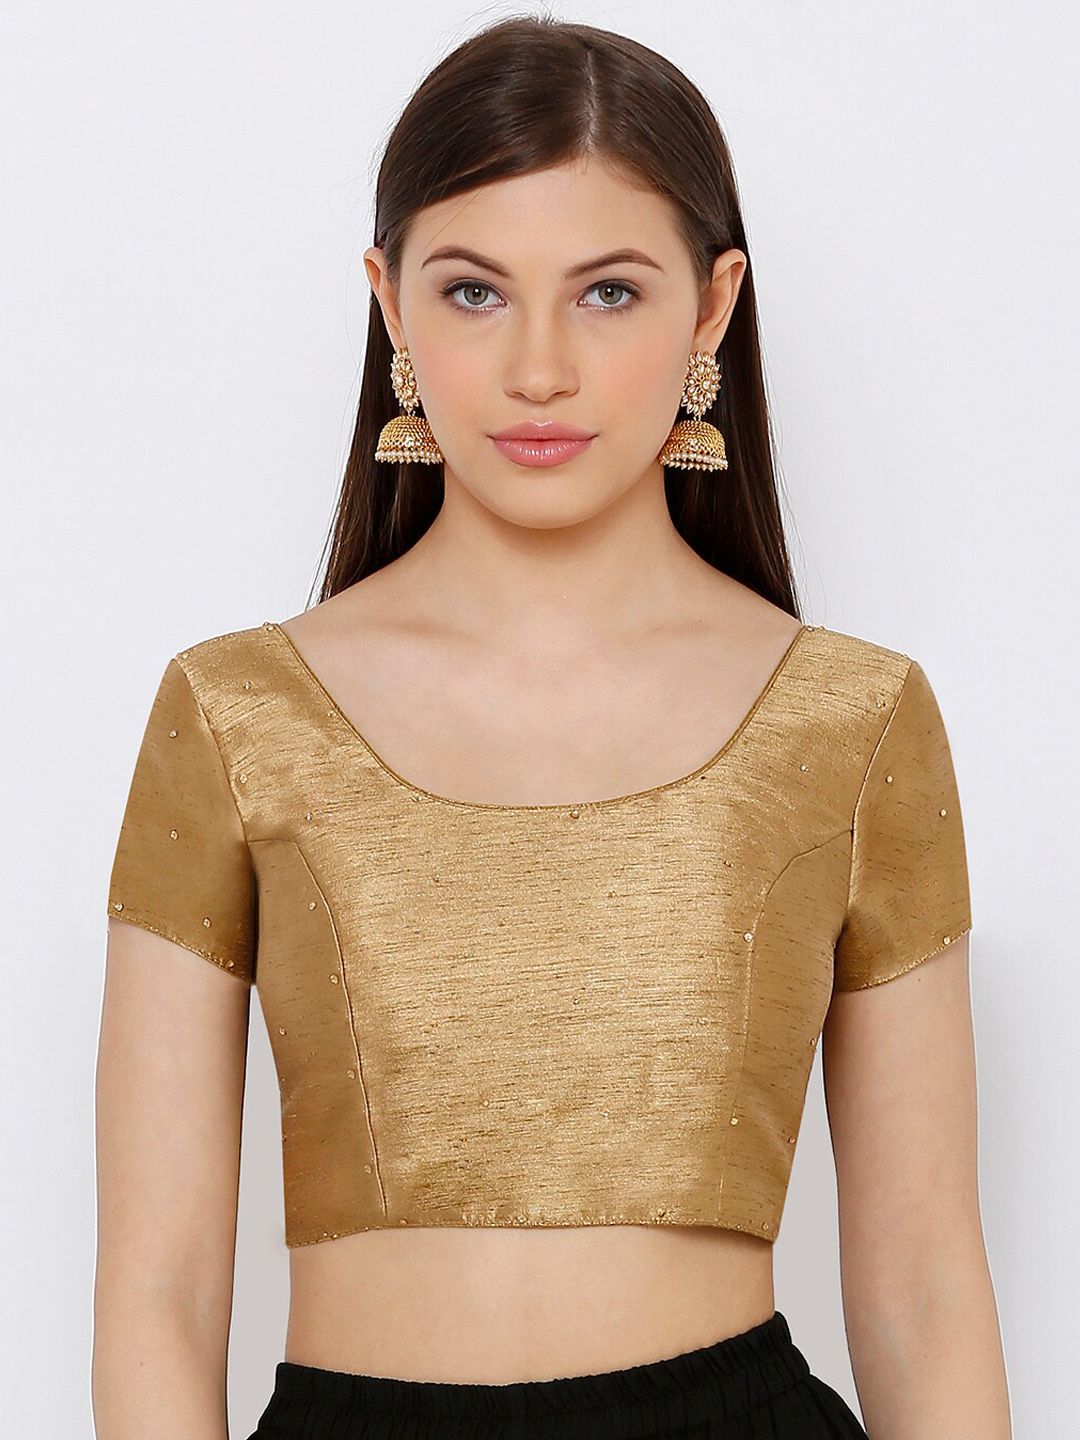 SALWAR STUDIO Women Copper-Toned Embellished Readymade Saree Blouse Price in India